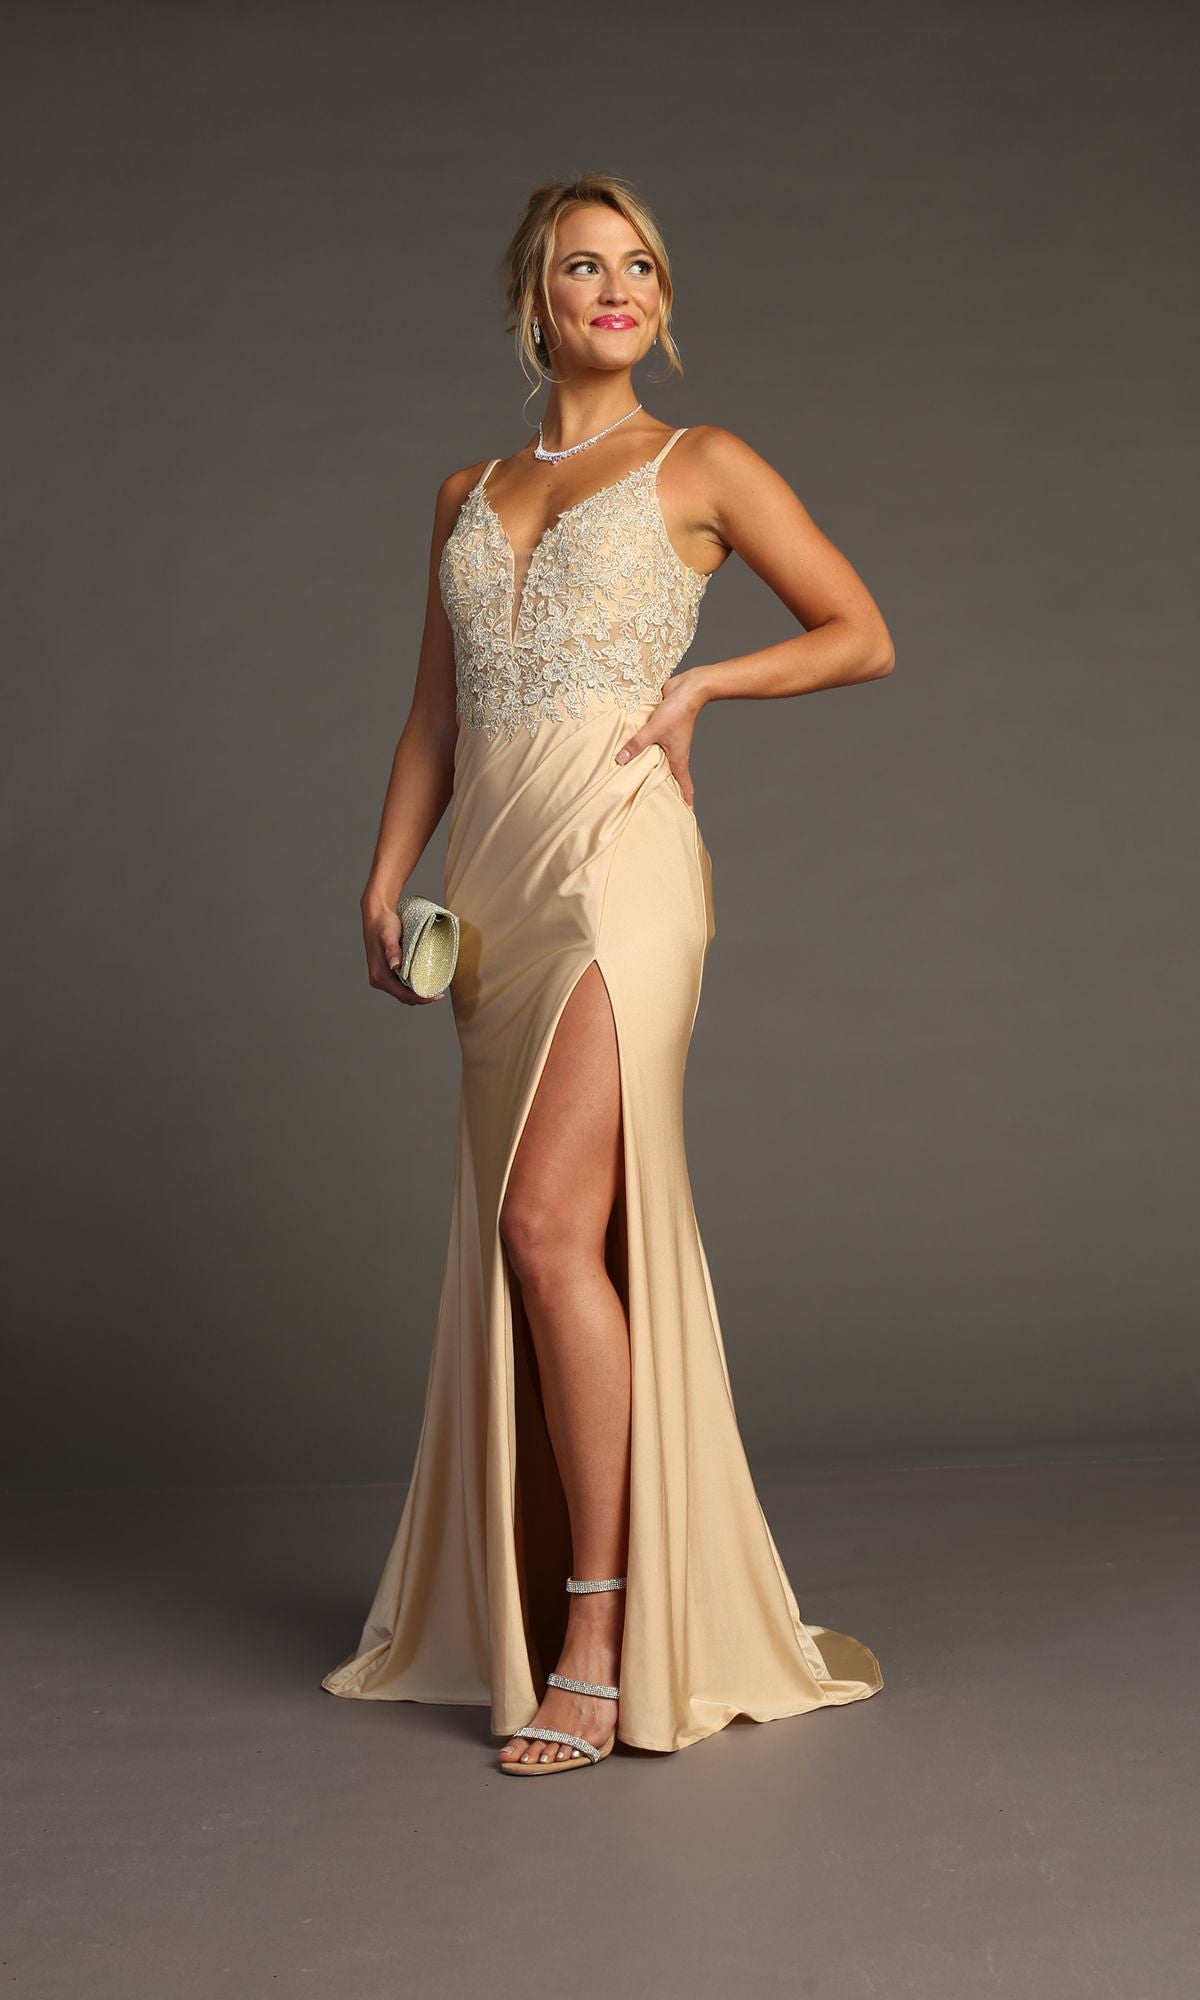 prom dresses for tall girls – Yuan's fashion and beauty choice